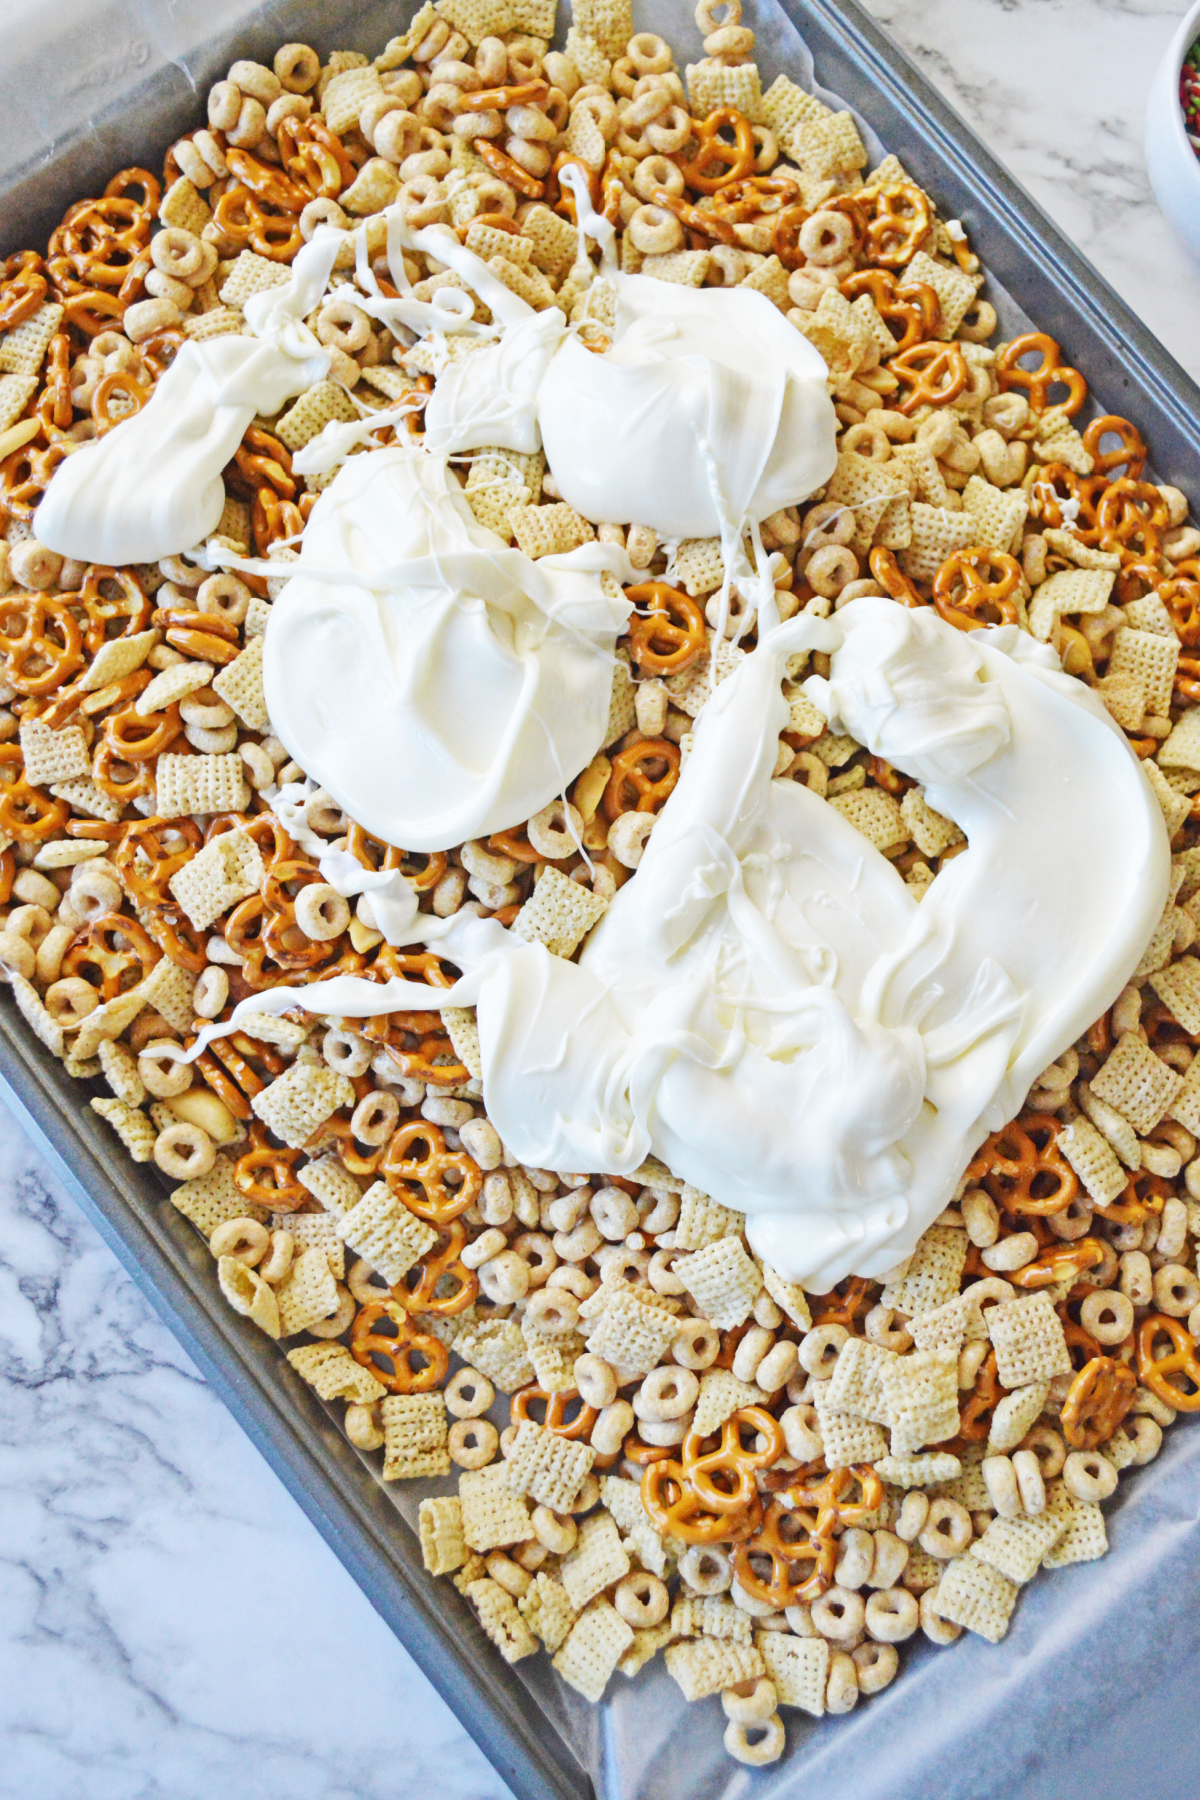 White chocolate poured over Chex mix